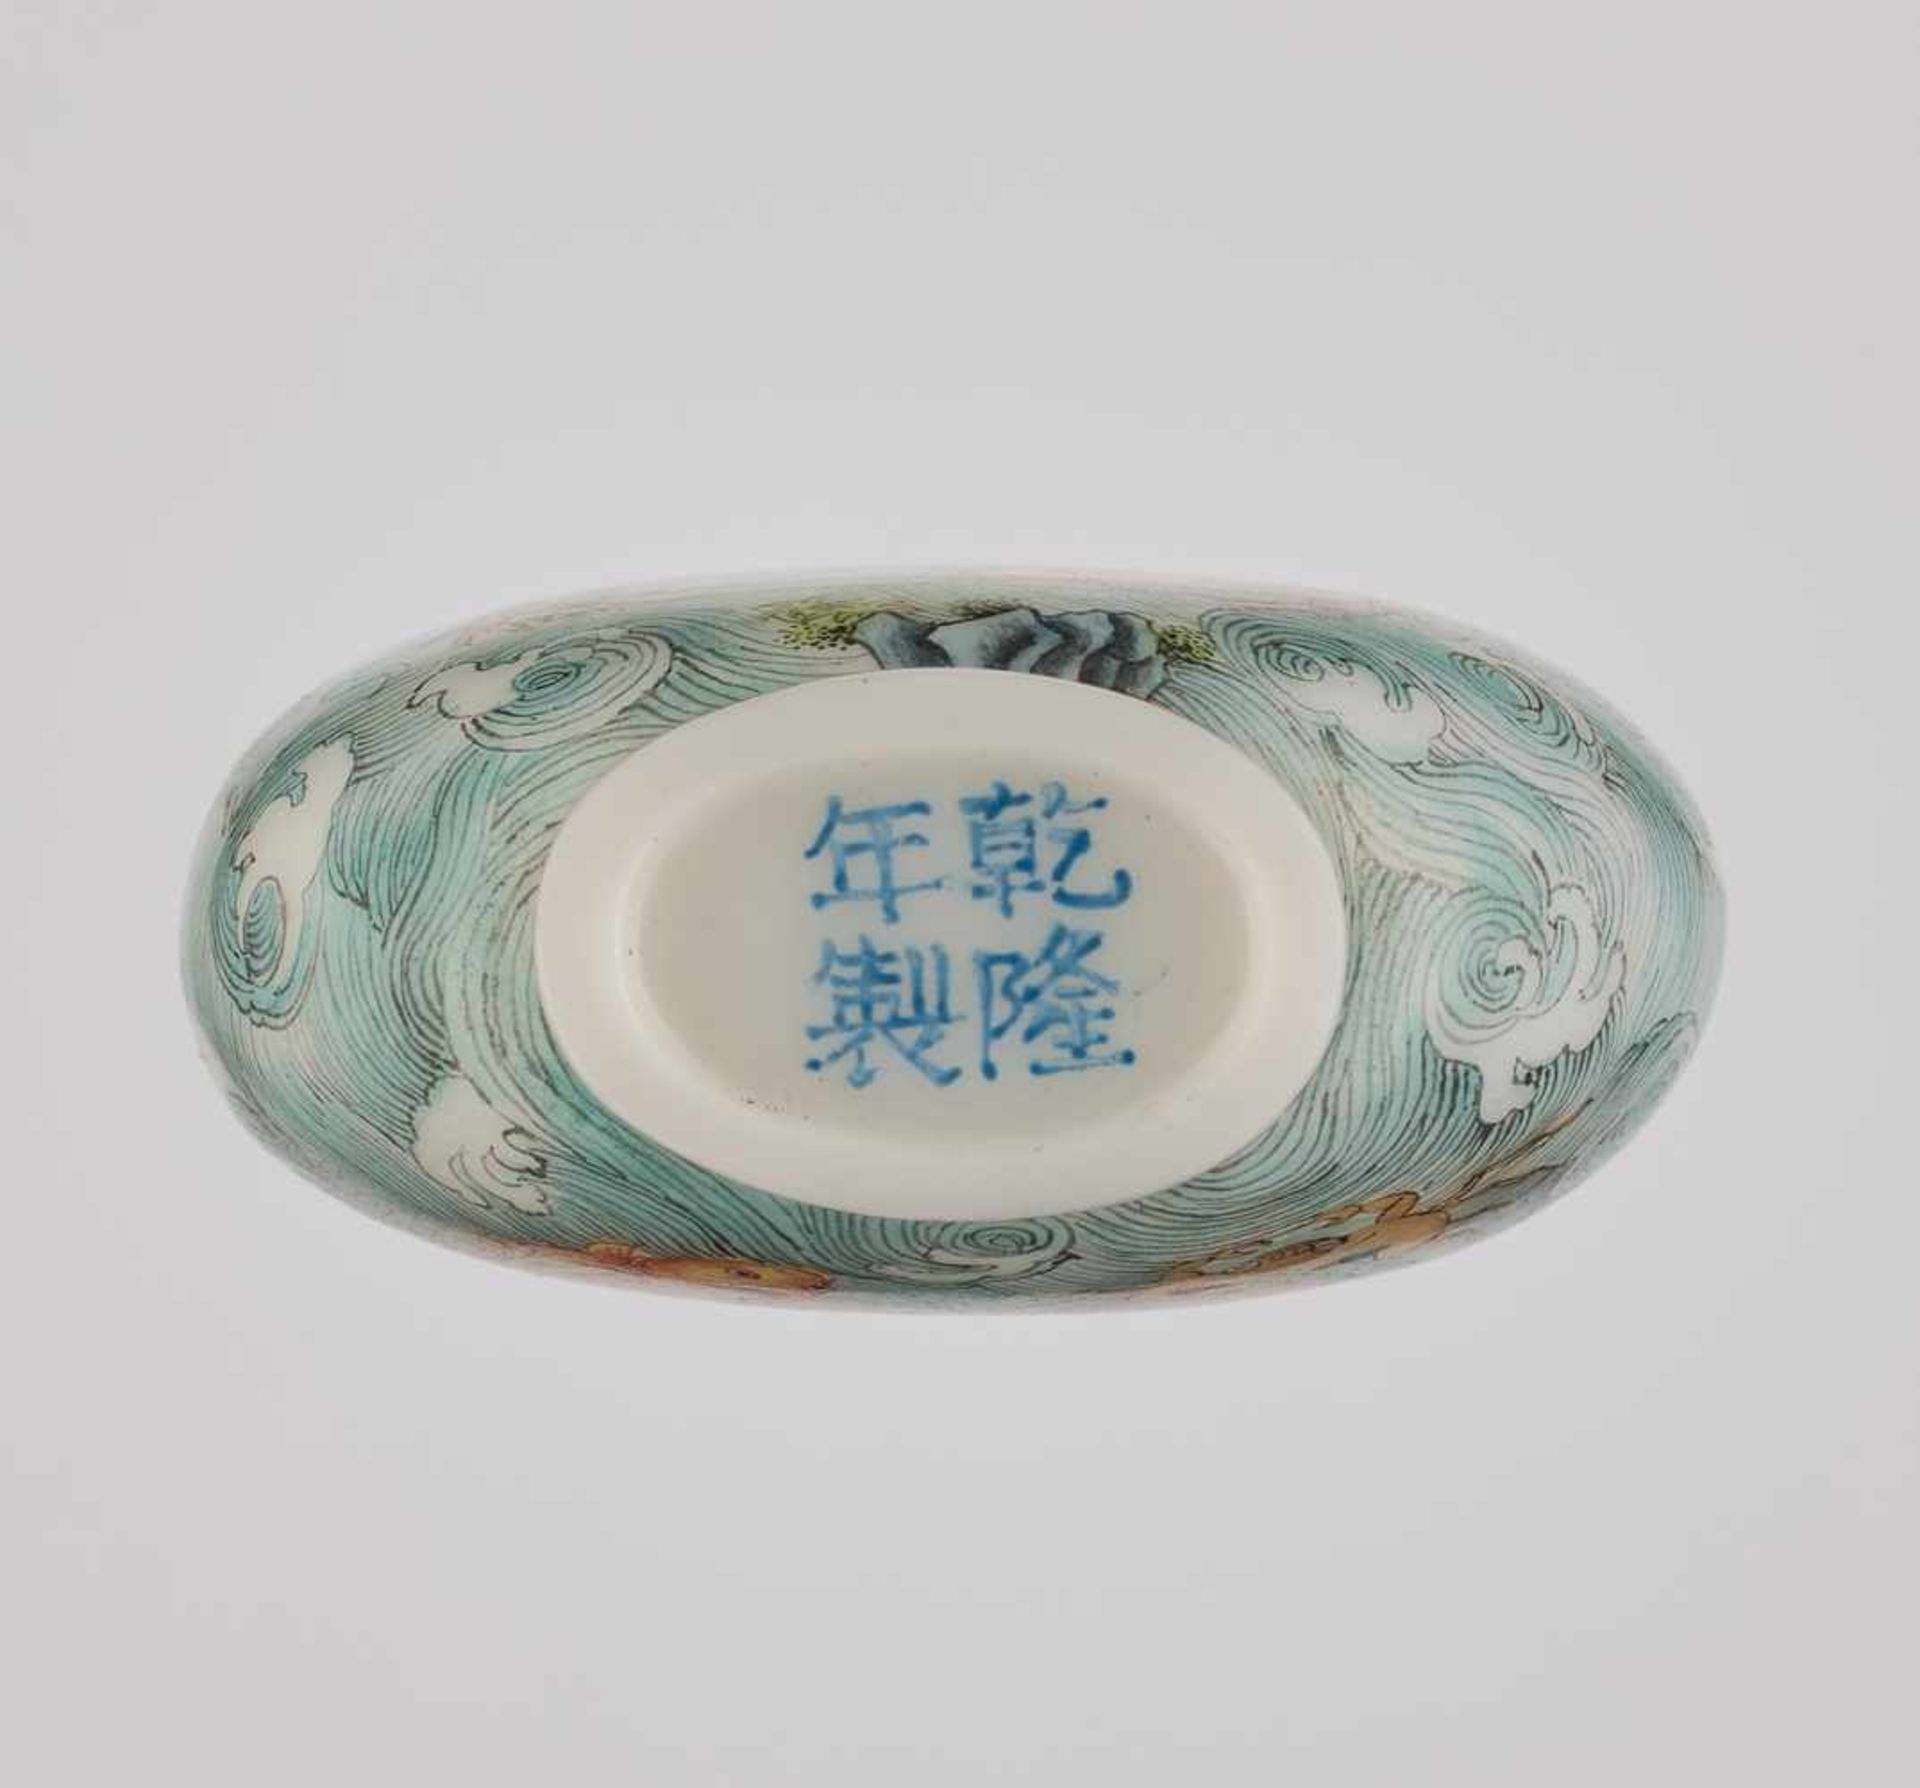 AN ENAMELED 'BAXIAN' GLASS SNUFF BOTTLE, 20th CENTURY Opaque white glass with delicately painted - Image 6 of 6